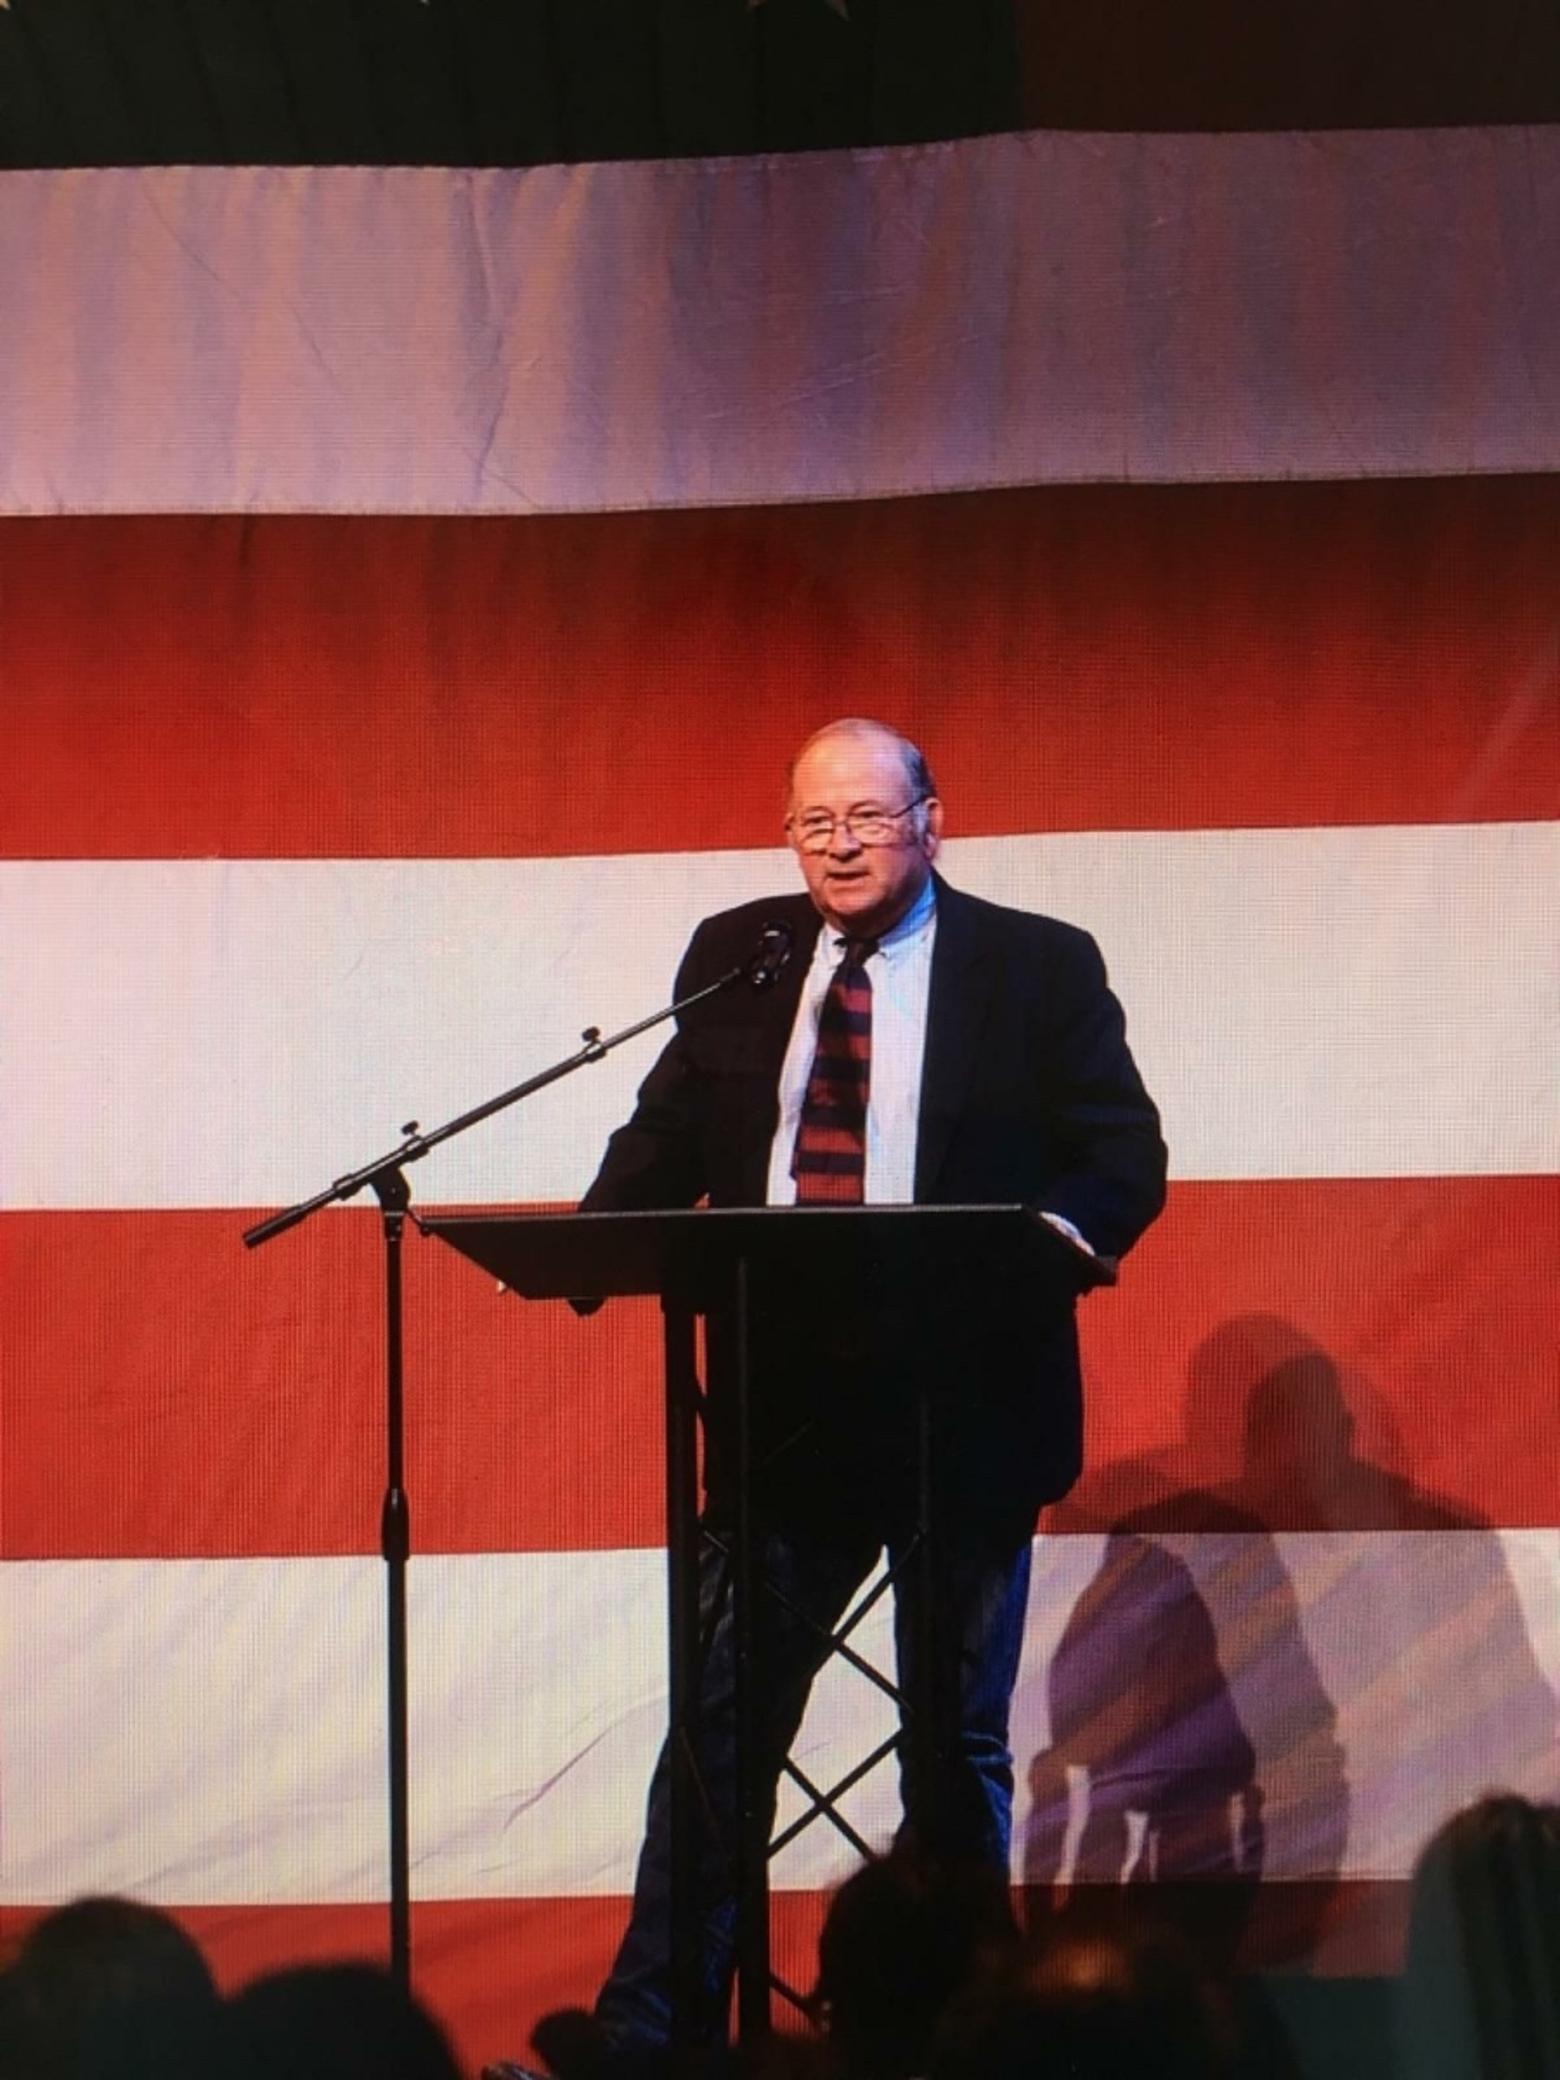 When he took off his cowboy duds, he could evince the look of a corporate executive. Bob Fanning, in his business attire, giving a speech after he briefly entered the Republican primary hoping to win a U.S. Senate seat to represent Montana. He withdrew from the race. Photo appeared on Facebook.